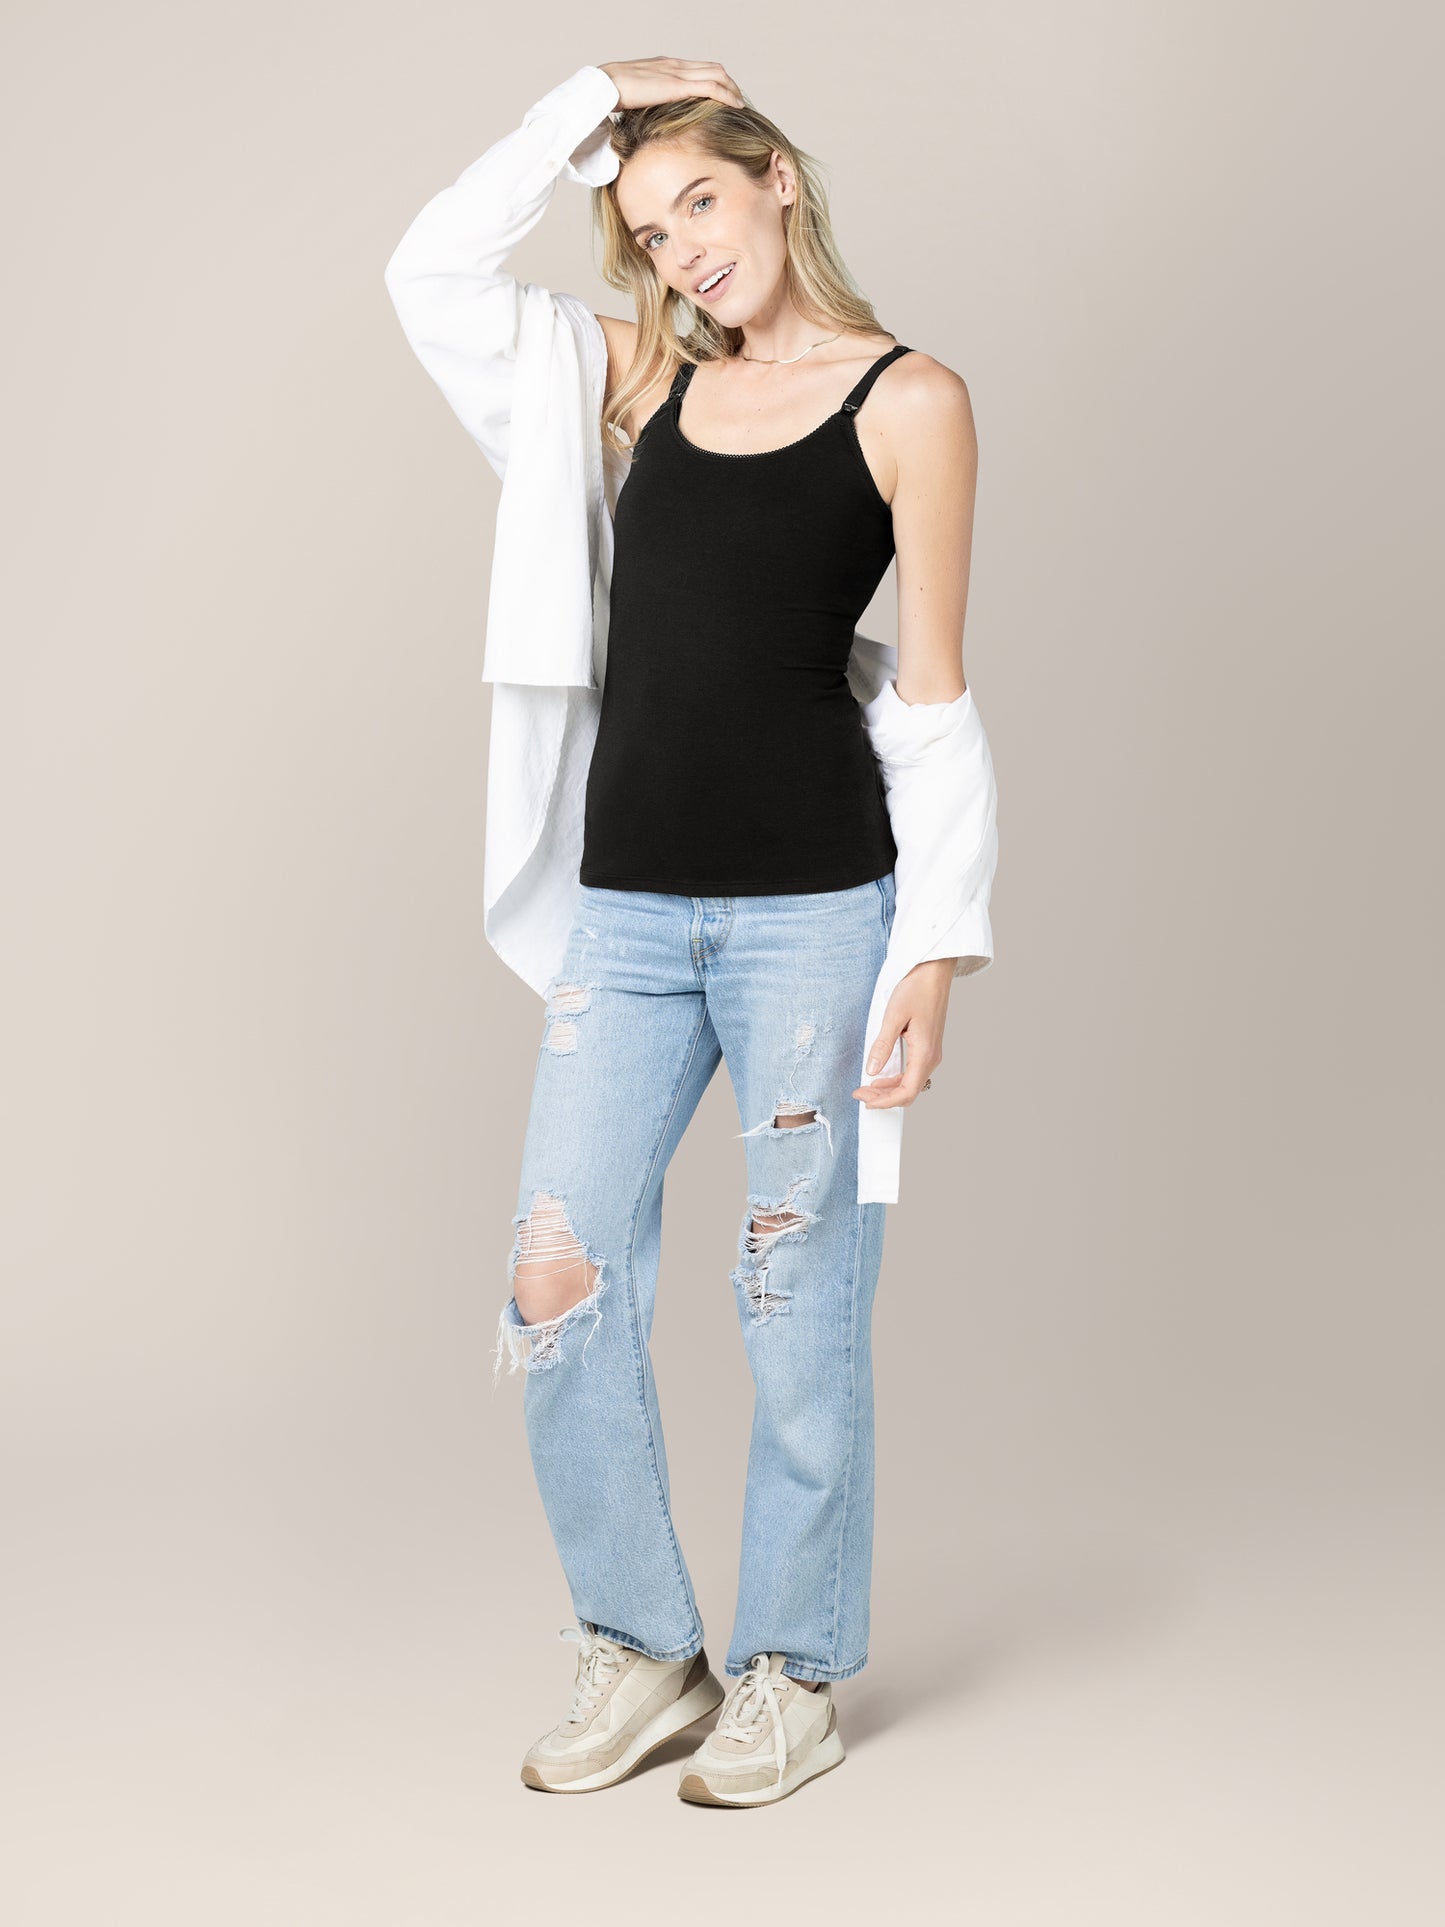 Front view of model wearing the Picot Trim Nursing Camisole in Black, paired with jeans, tennis shoes and an open button-down shirt. 